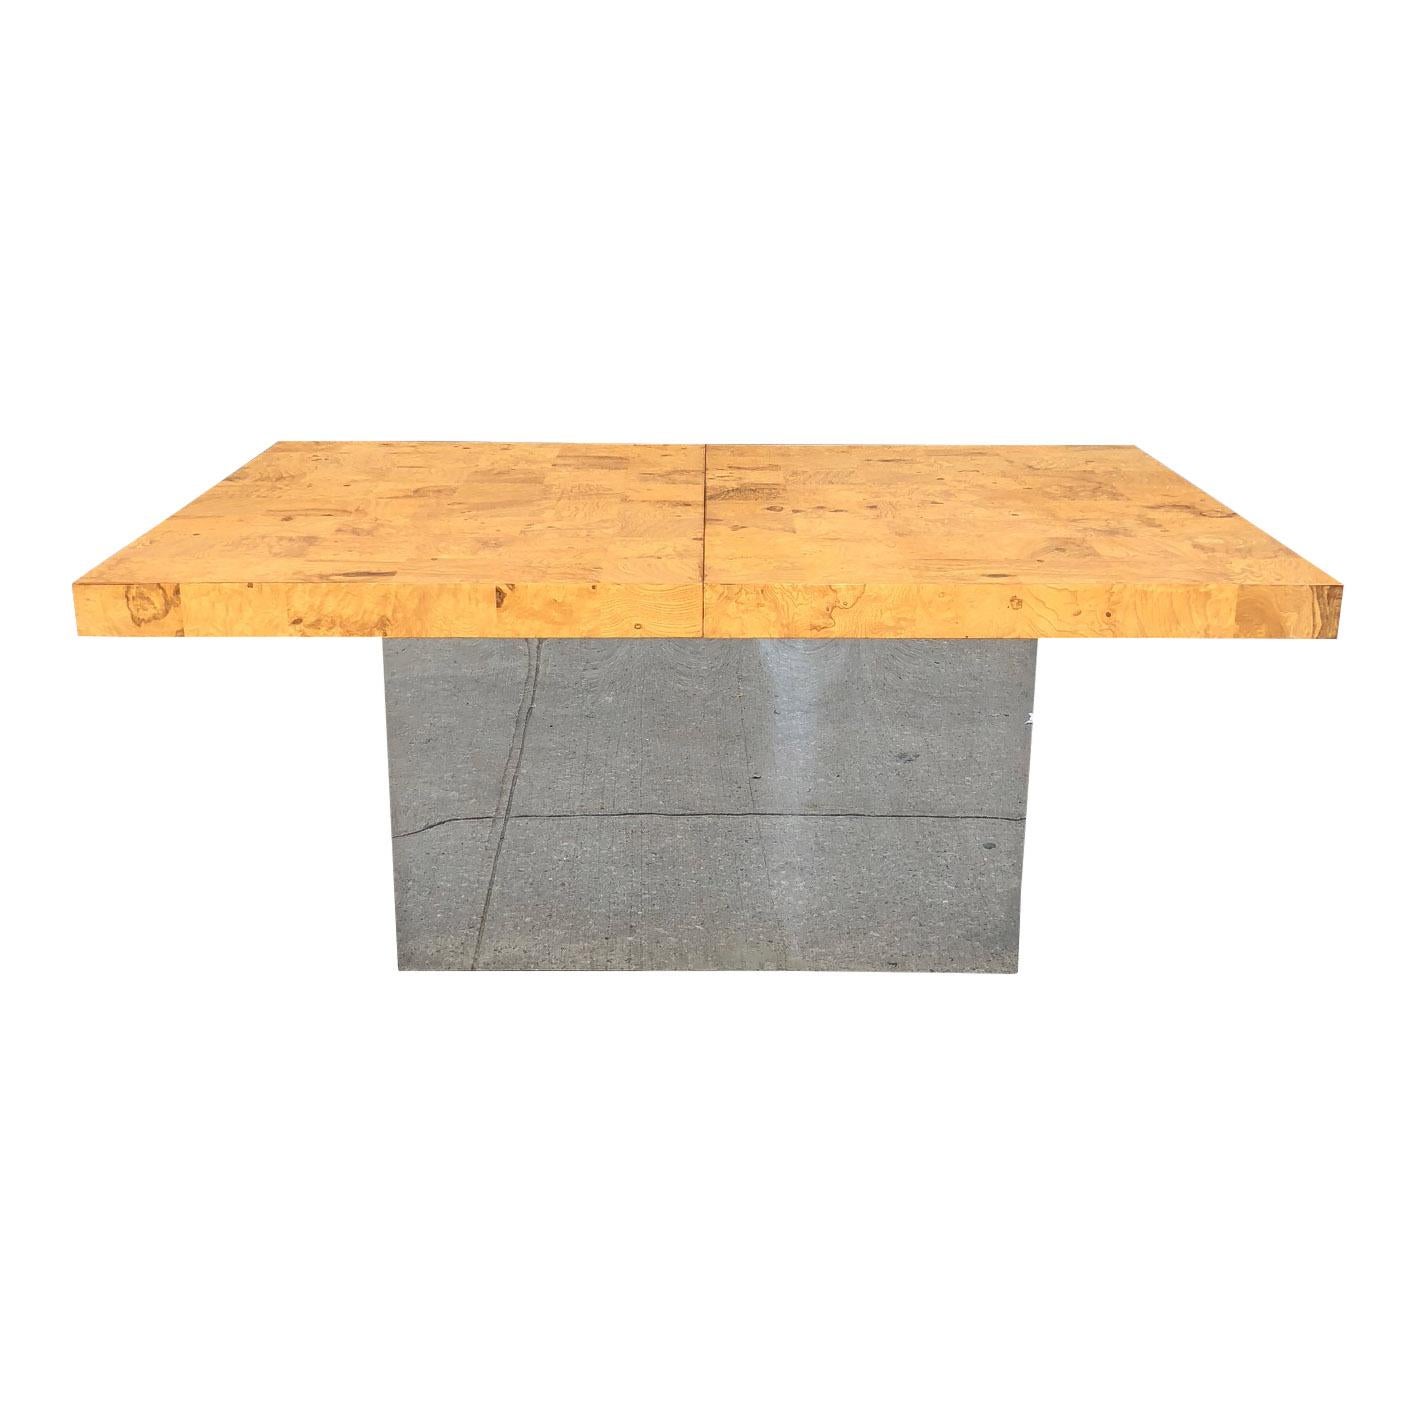 For your consideration is a striking midcentury dining table by Milo Baughman for Thayer Coggin.

The table sits atop a highly-reflective chrome base. The top is a pastiche of patchwork burl wood.

Measures: H 29.5 in. x W 44 in. x D 66 in.

The